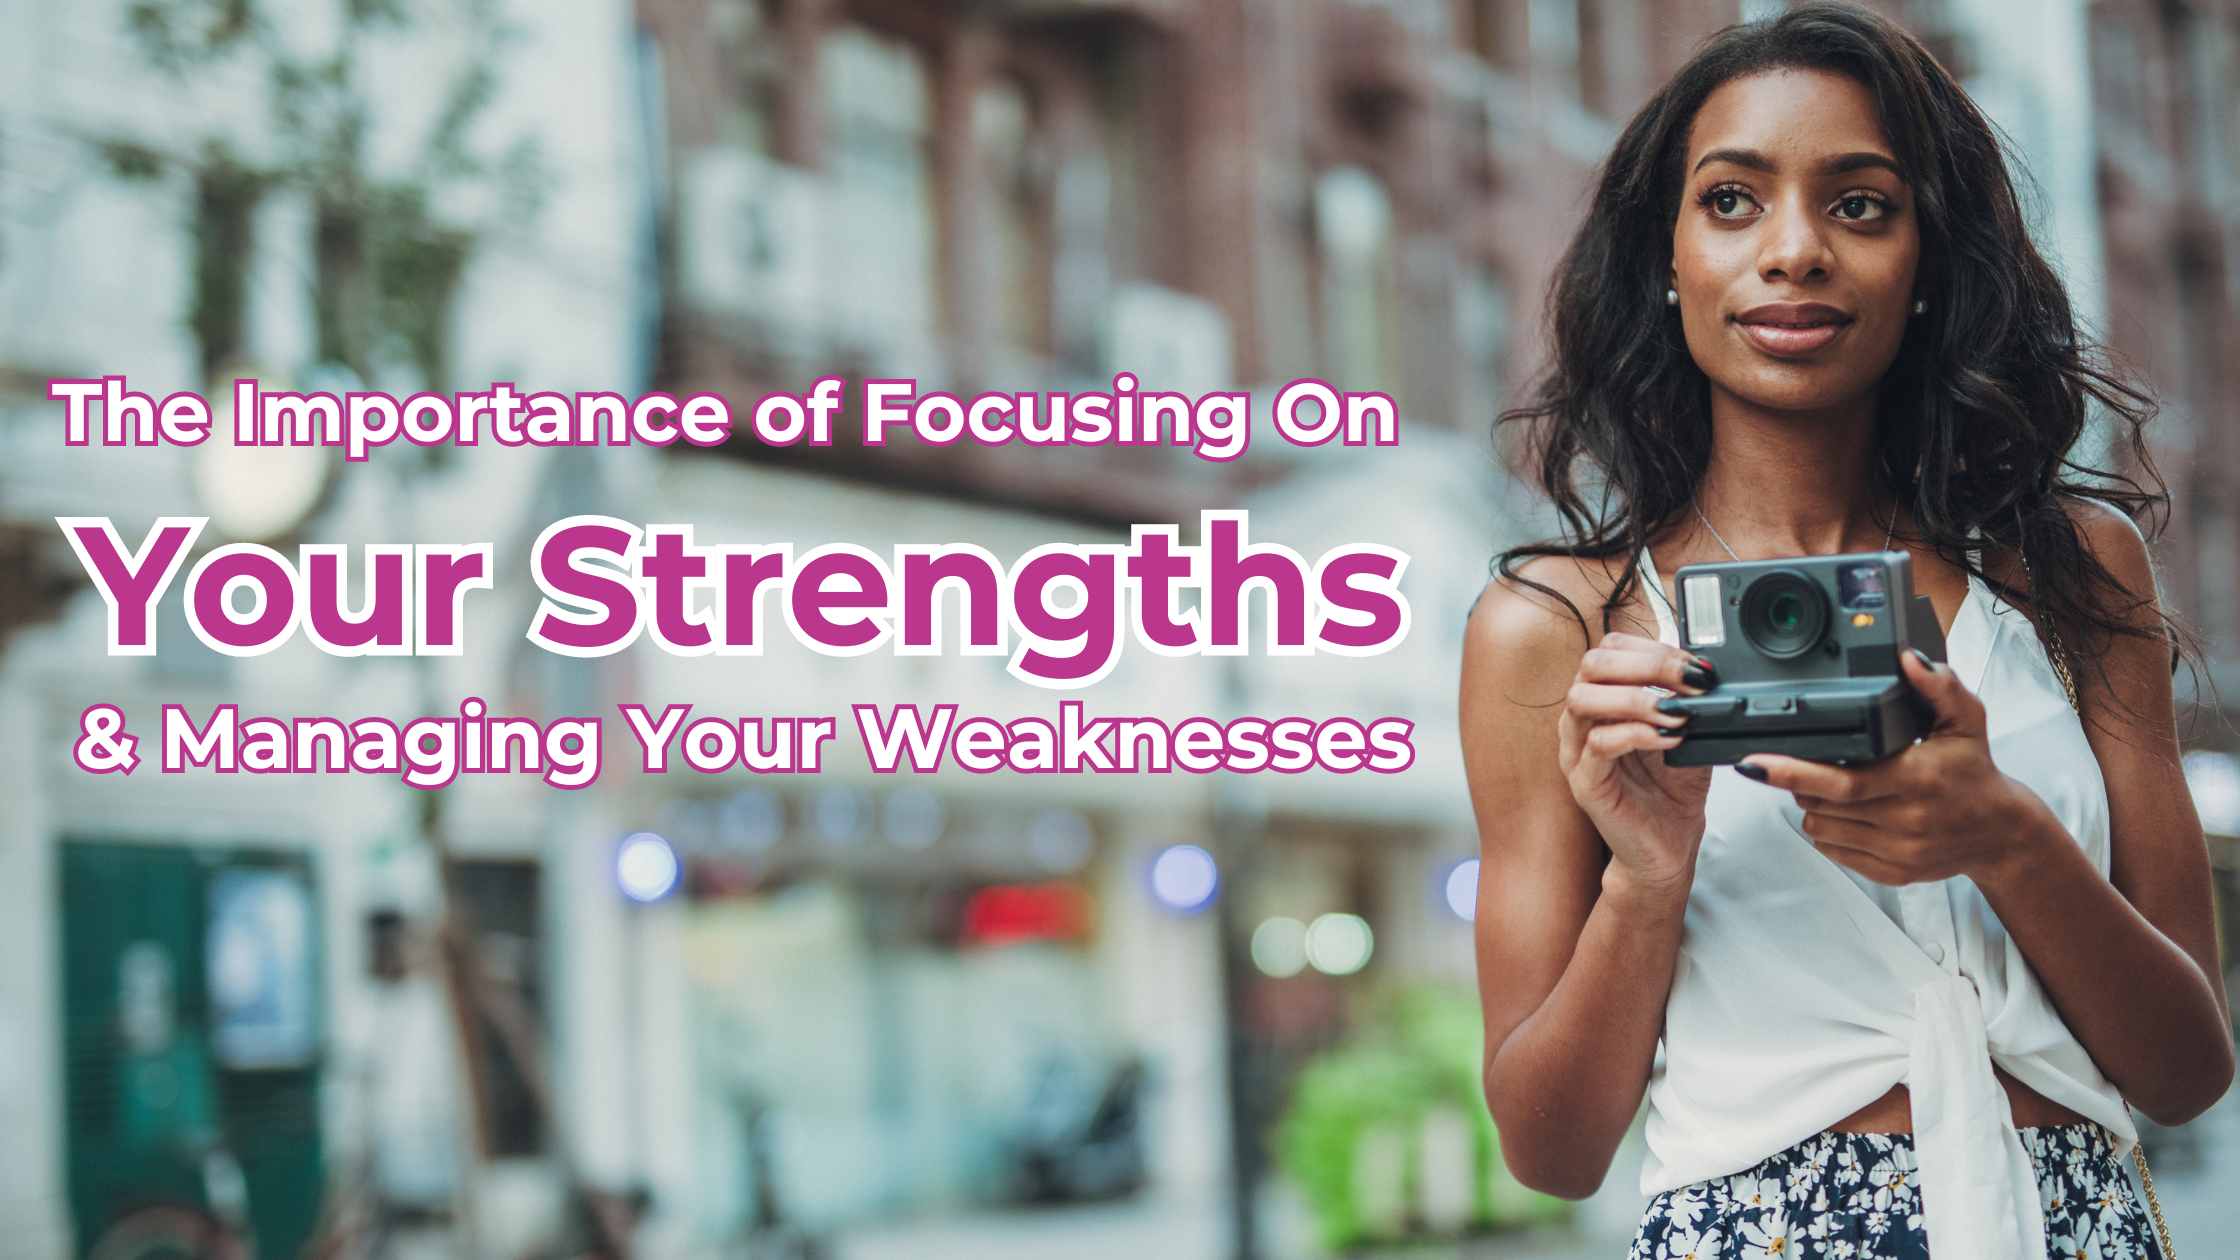 The Importance of Focusing on Your Strengths & Managing Your Weaknesses